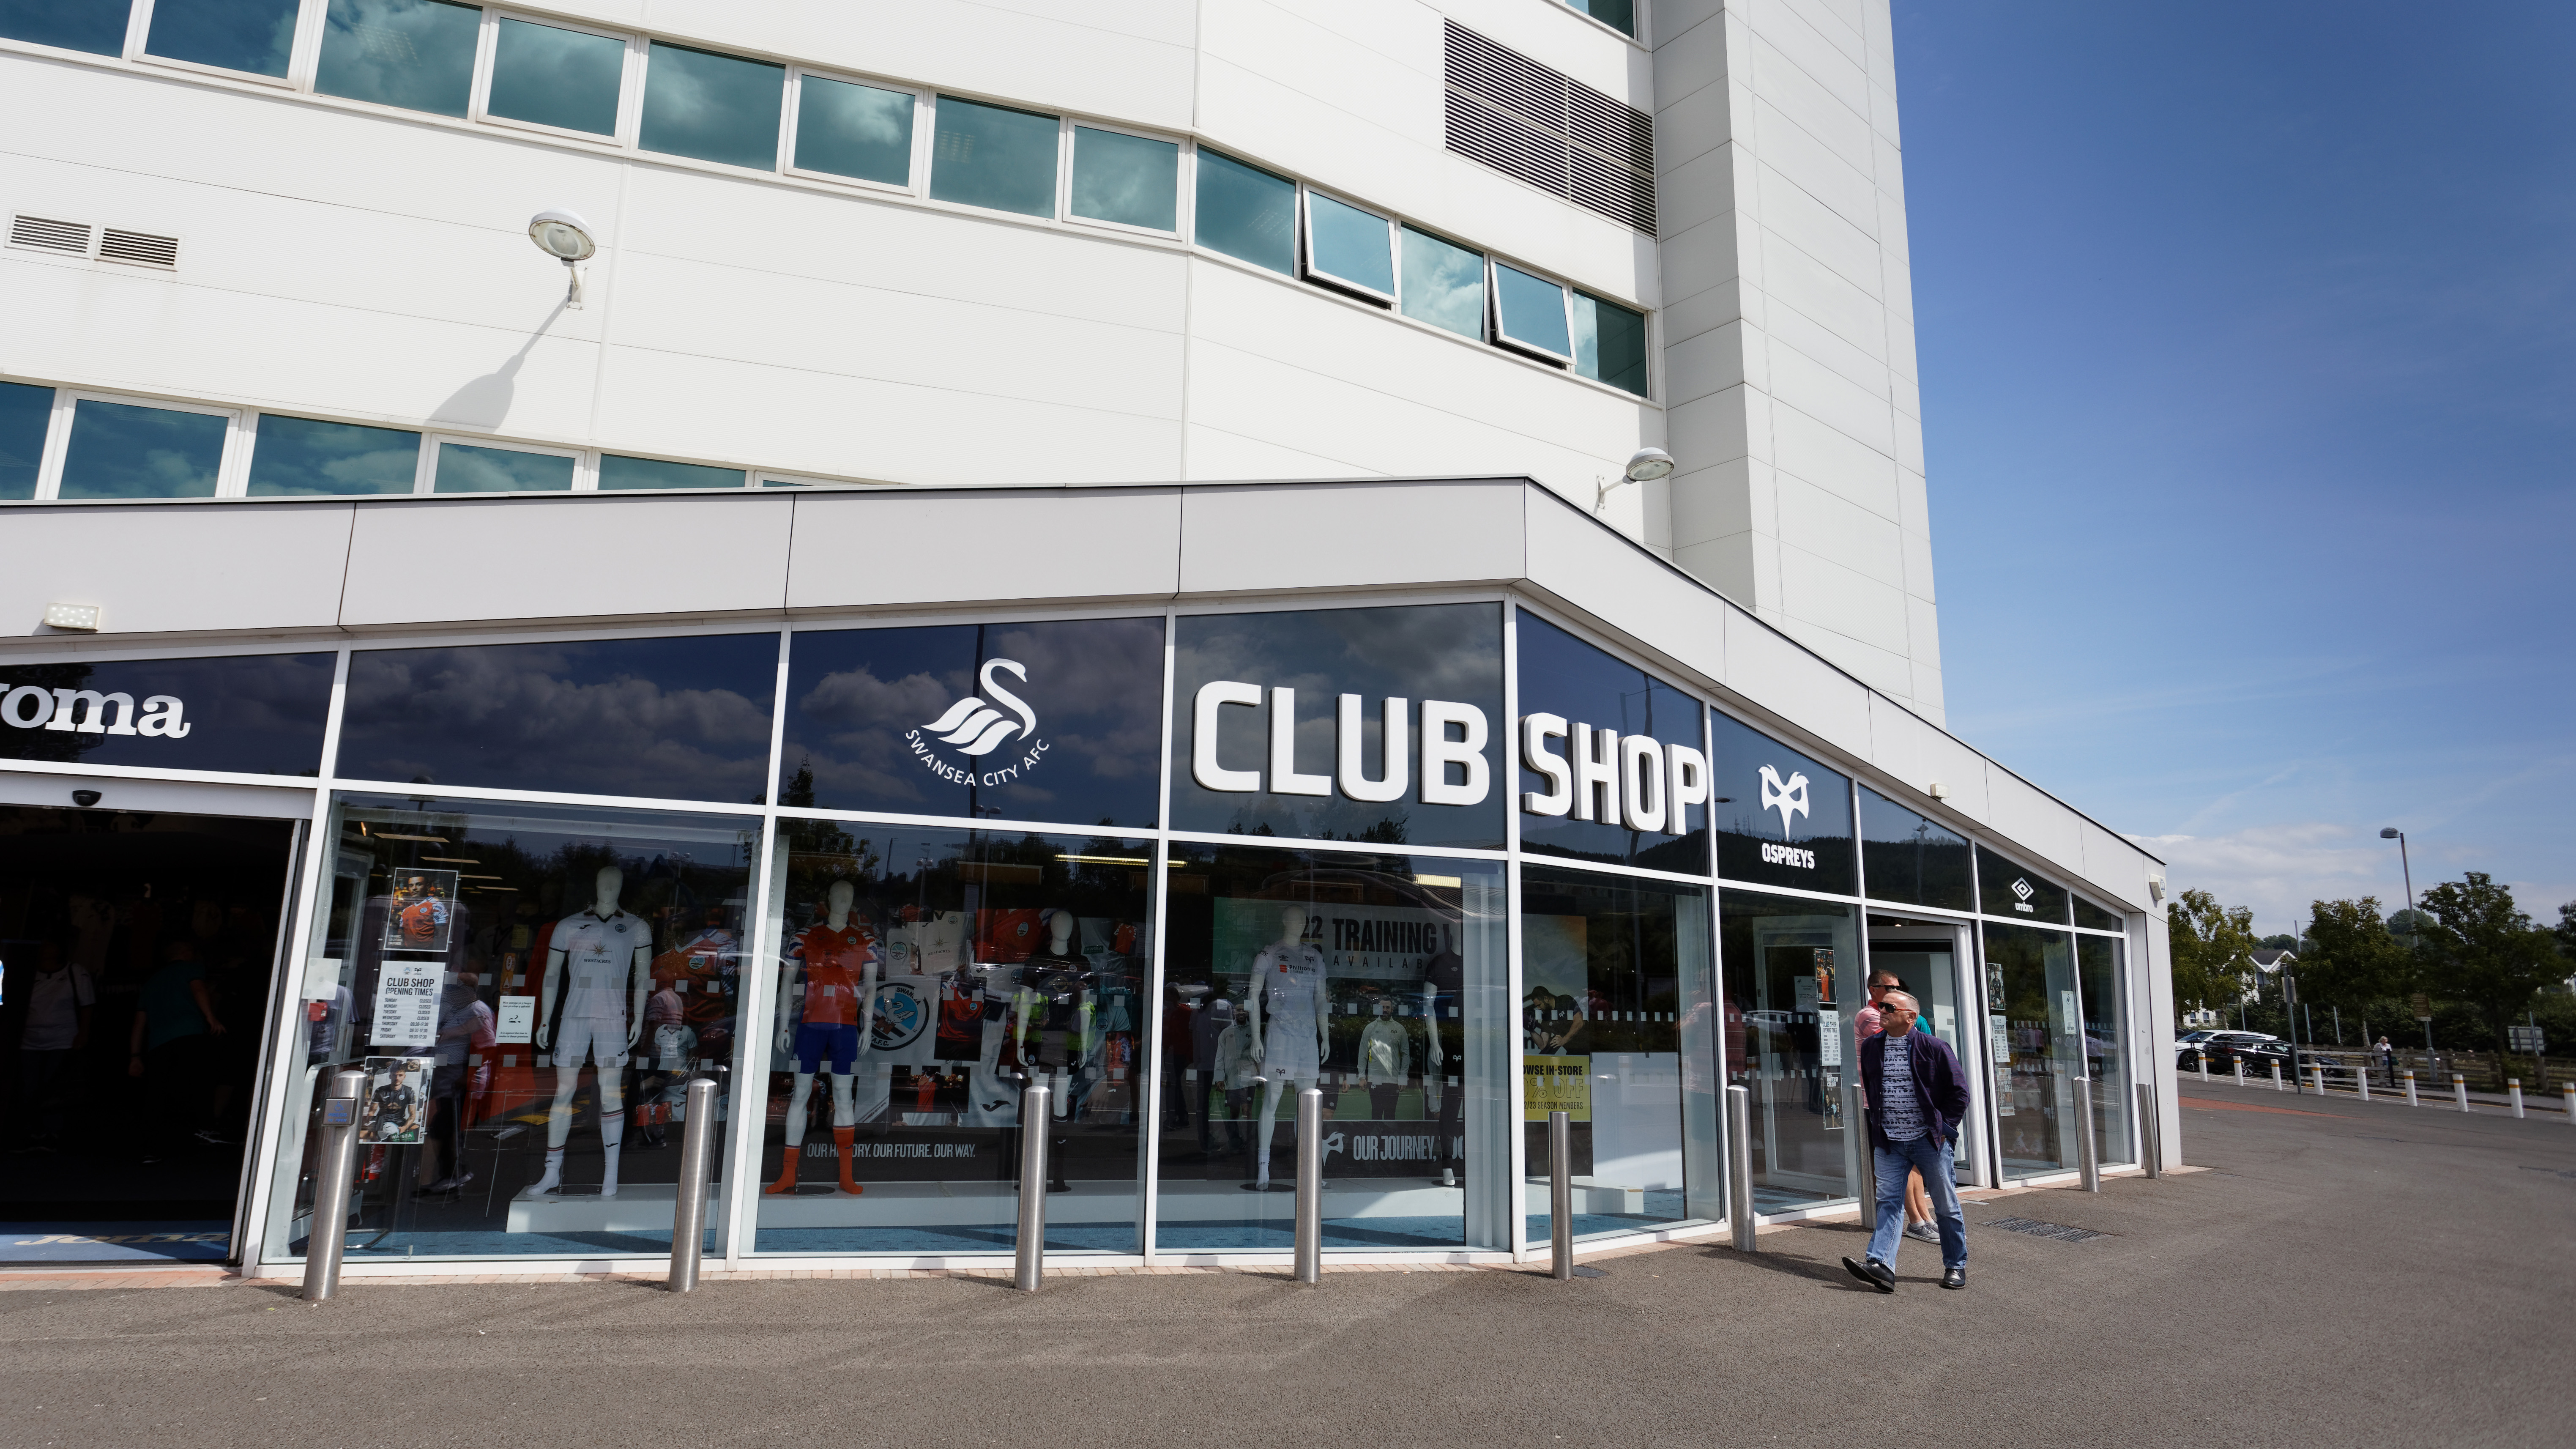 External view of the Swansea City Club Shop